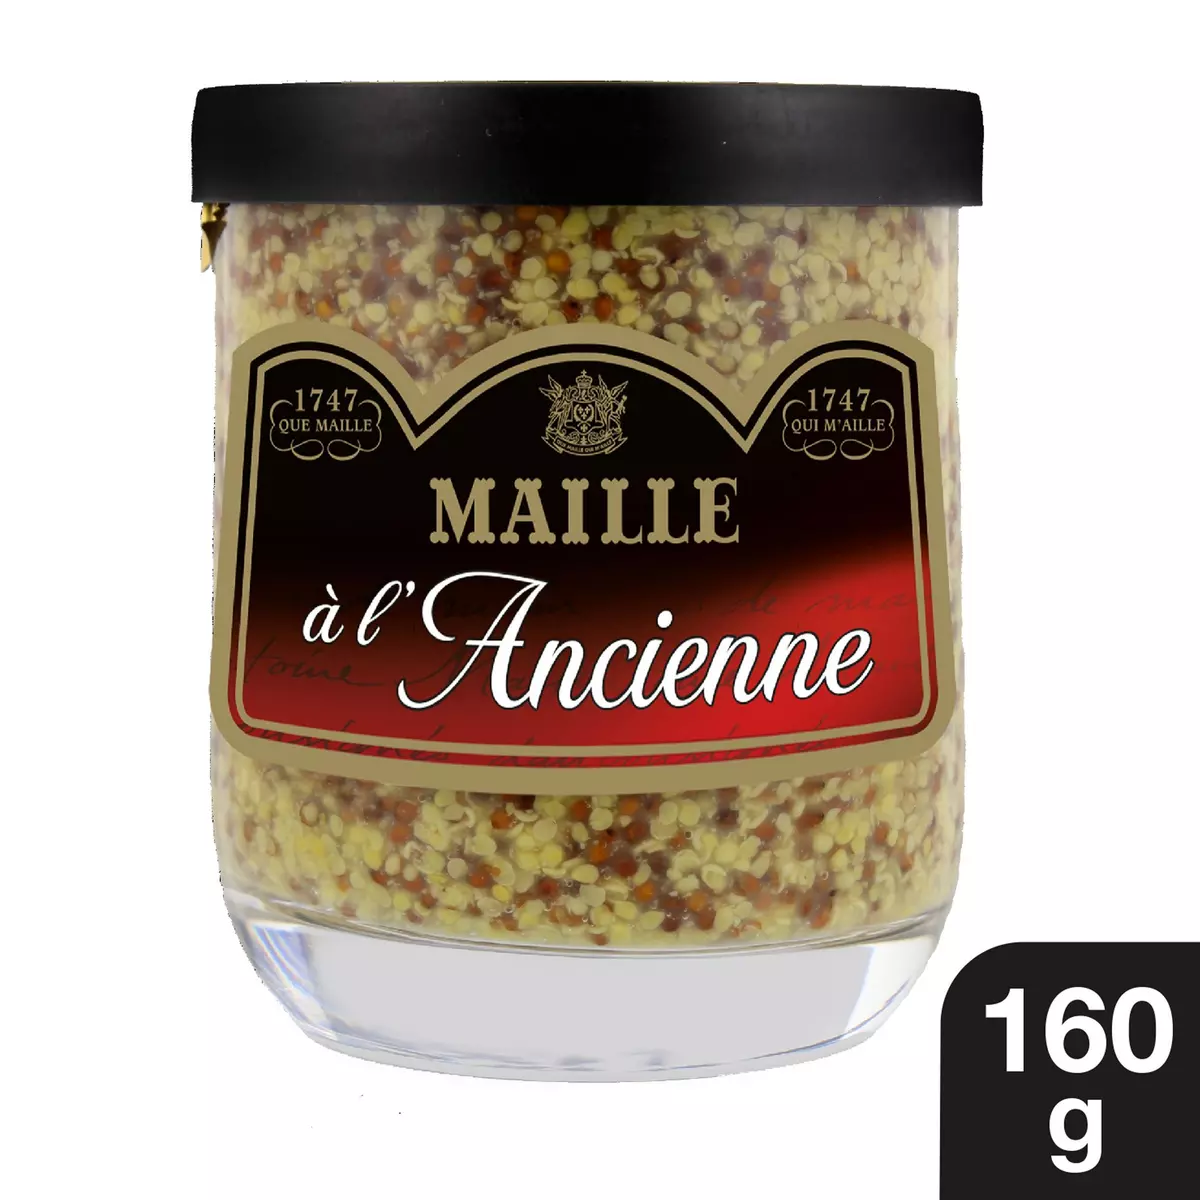 Maille Moutarde À L'ancienne Bocal 380G (Maille)